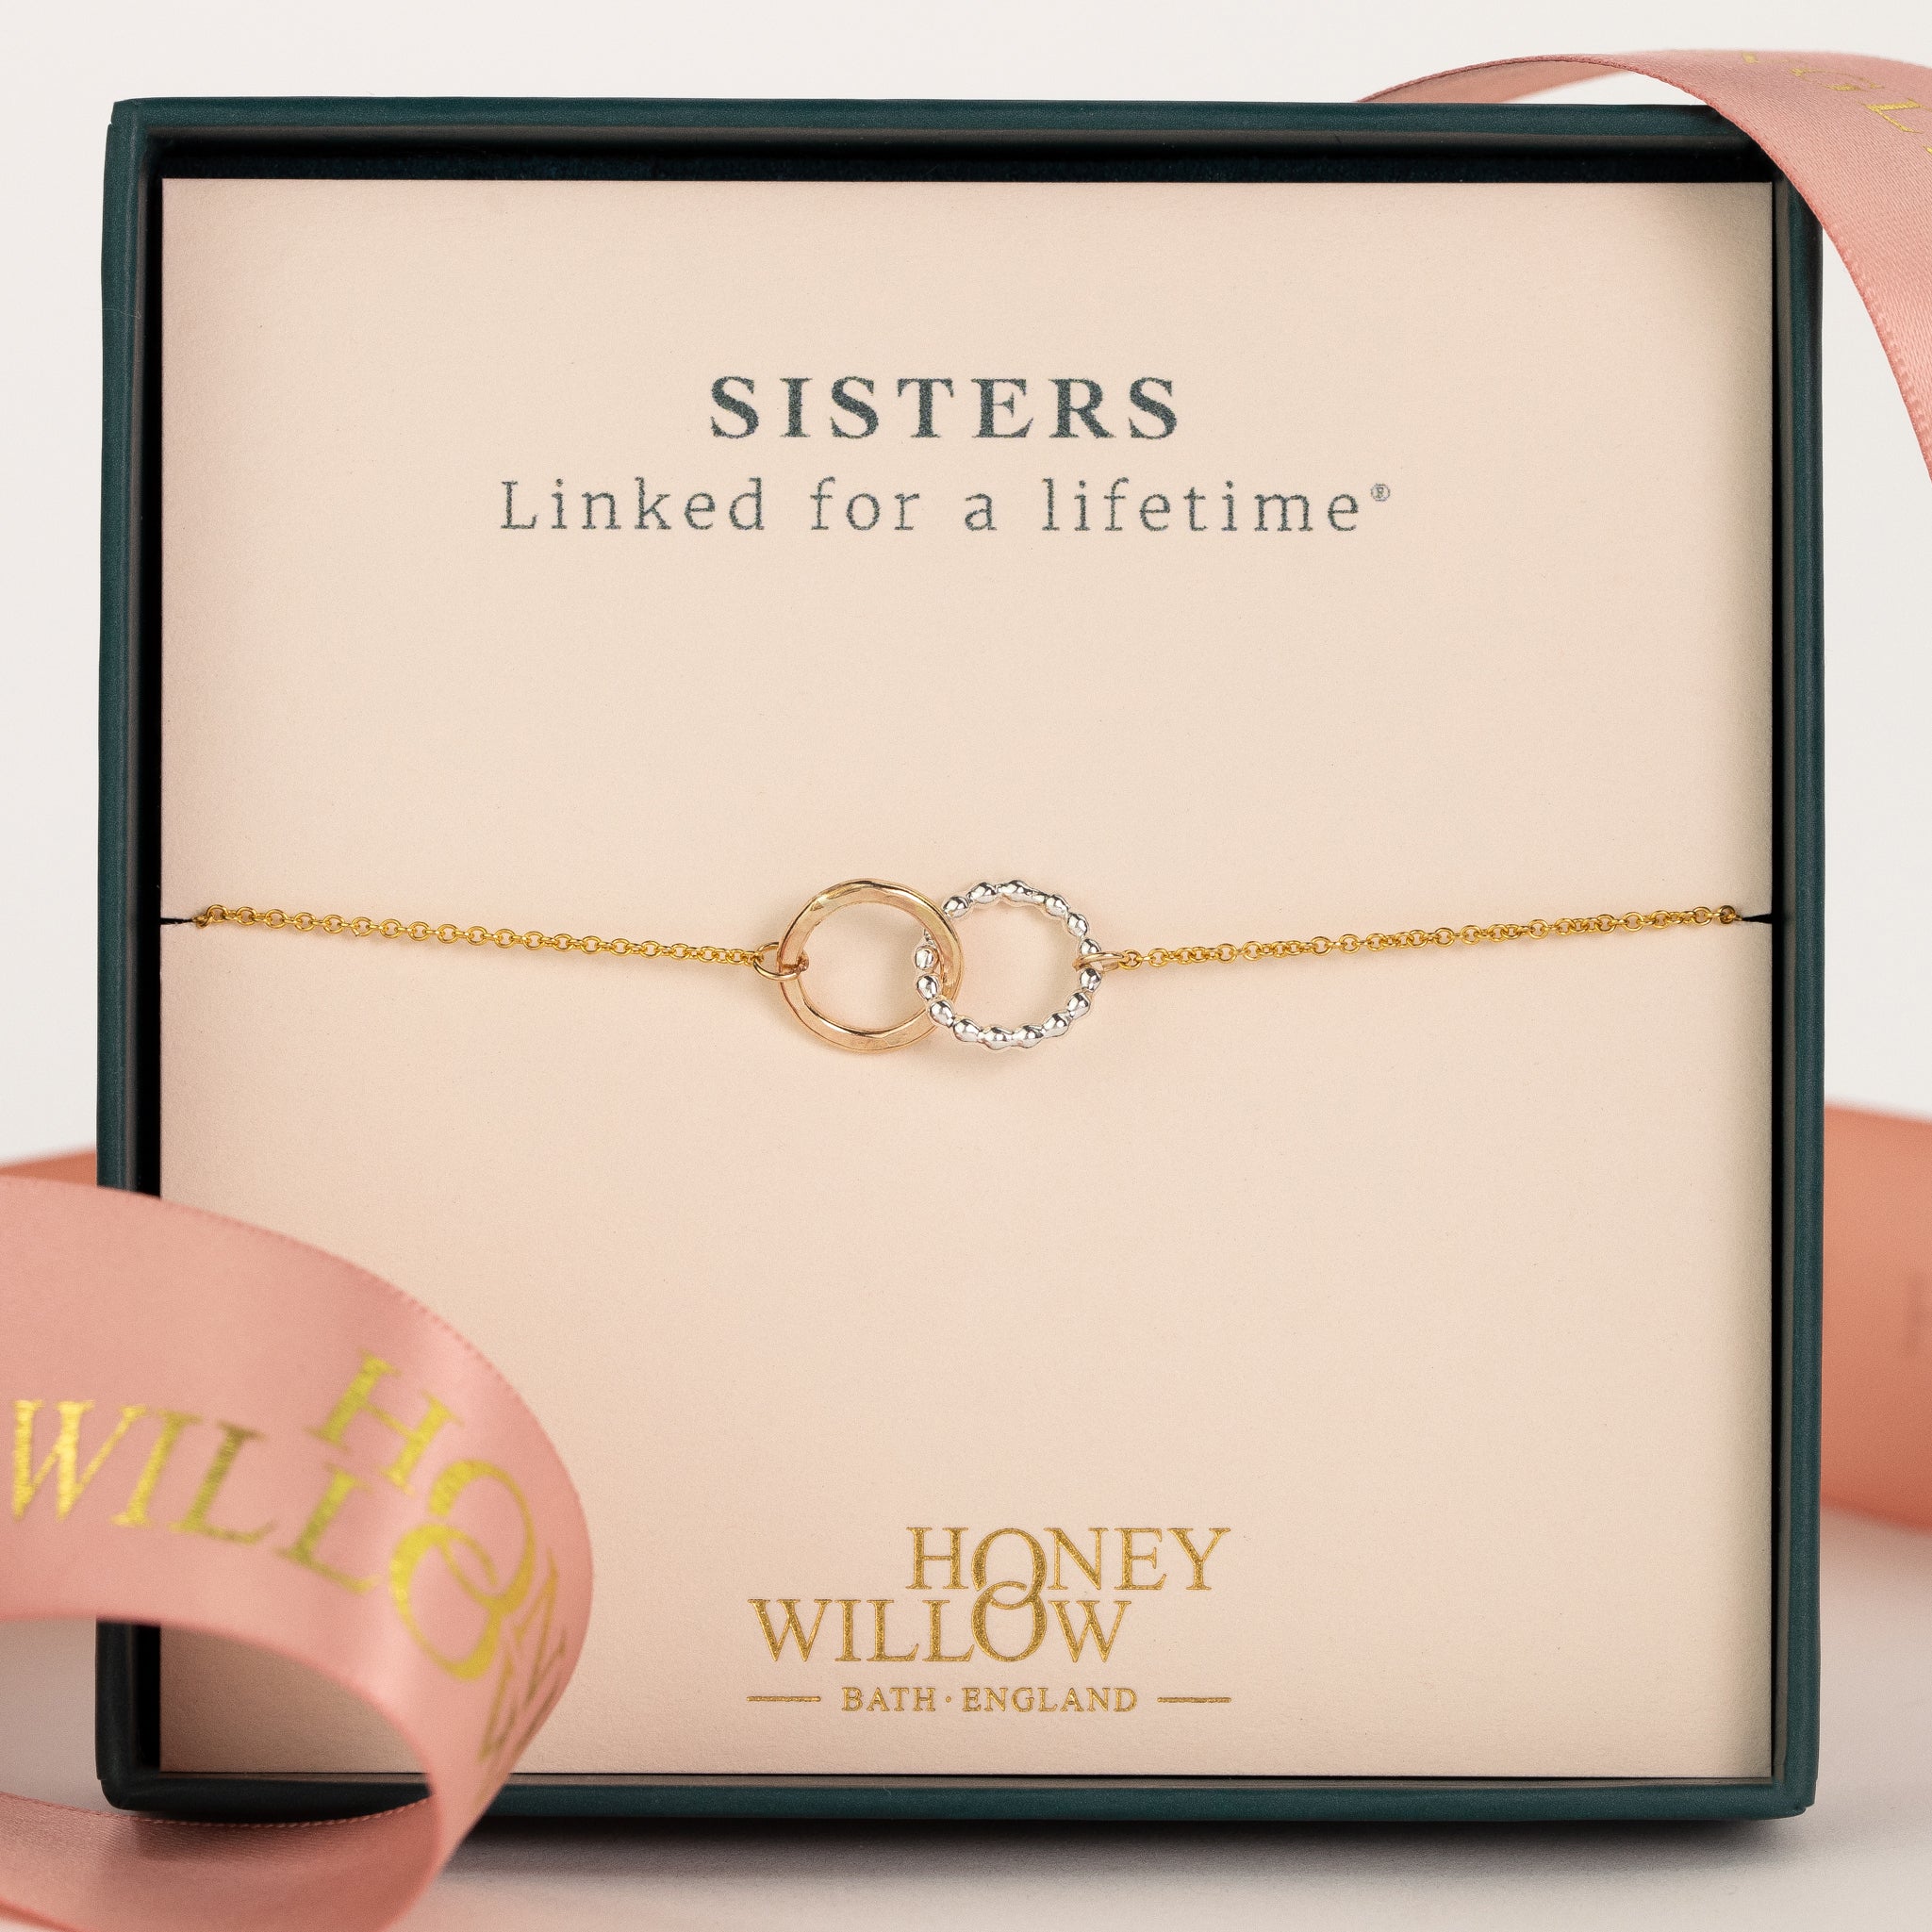 Buy Best Sister Ever Bracelet, Silver or Rose Gold Bracelet, Maid of Honor  Jewelry, BFF Sister Gift, Sister From Another Mister Online in India - Etsy